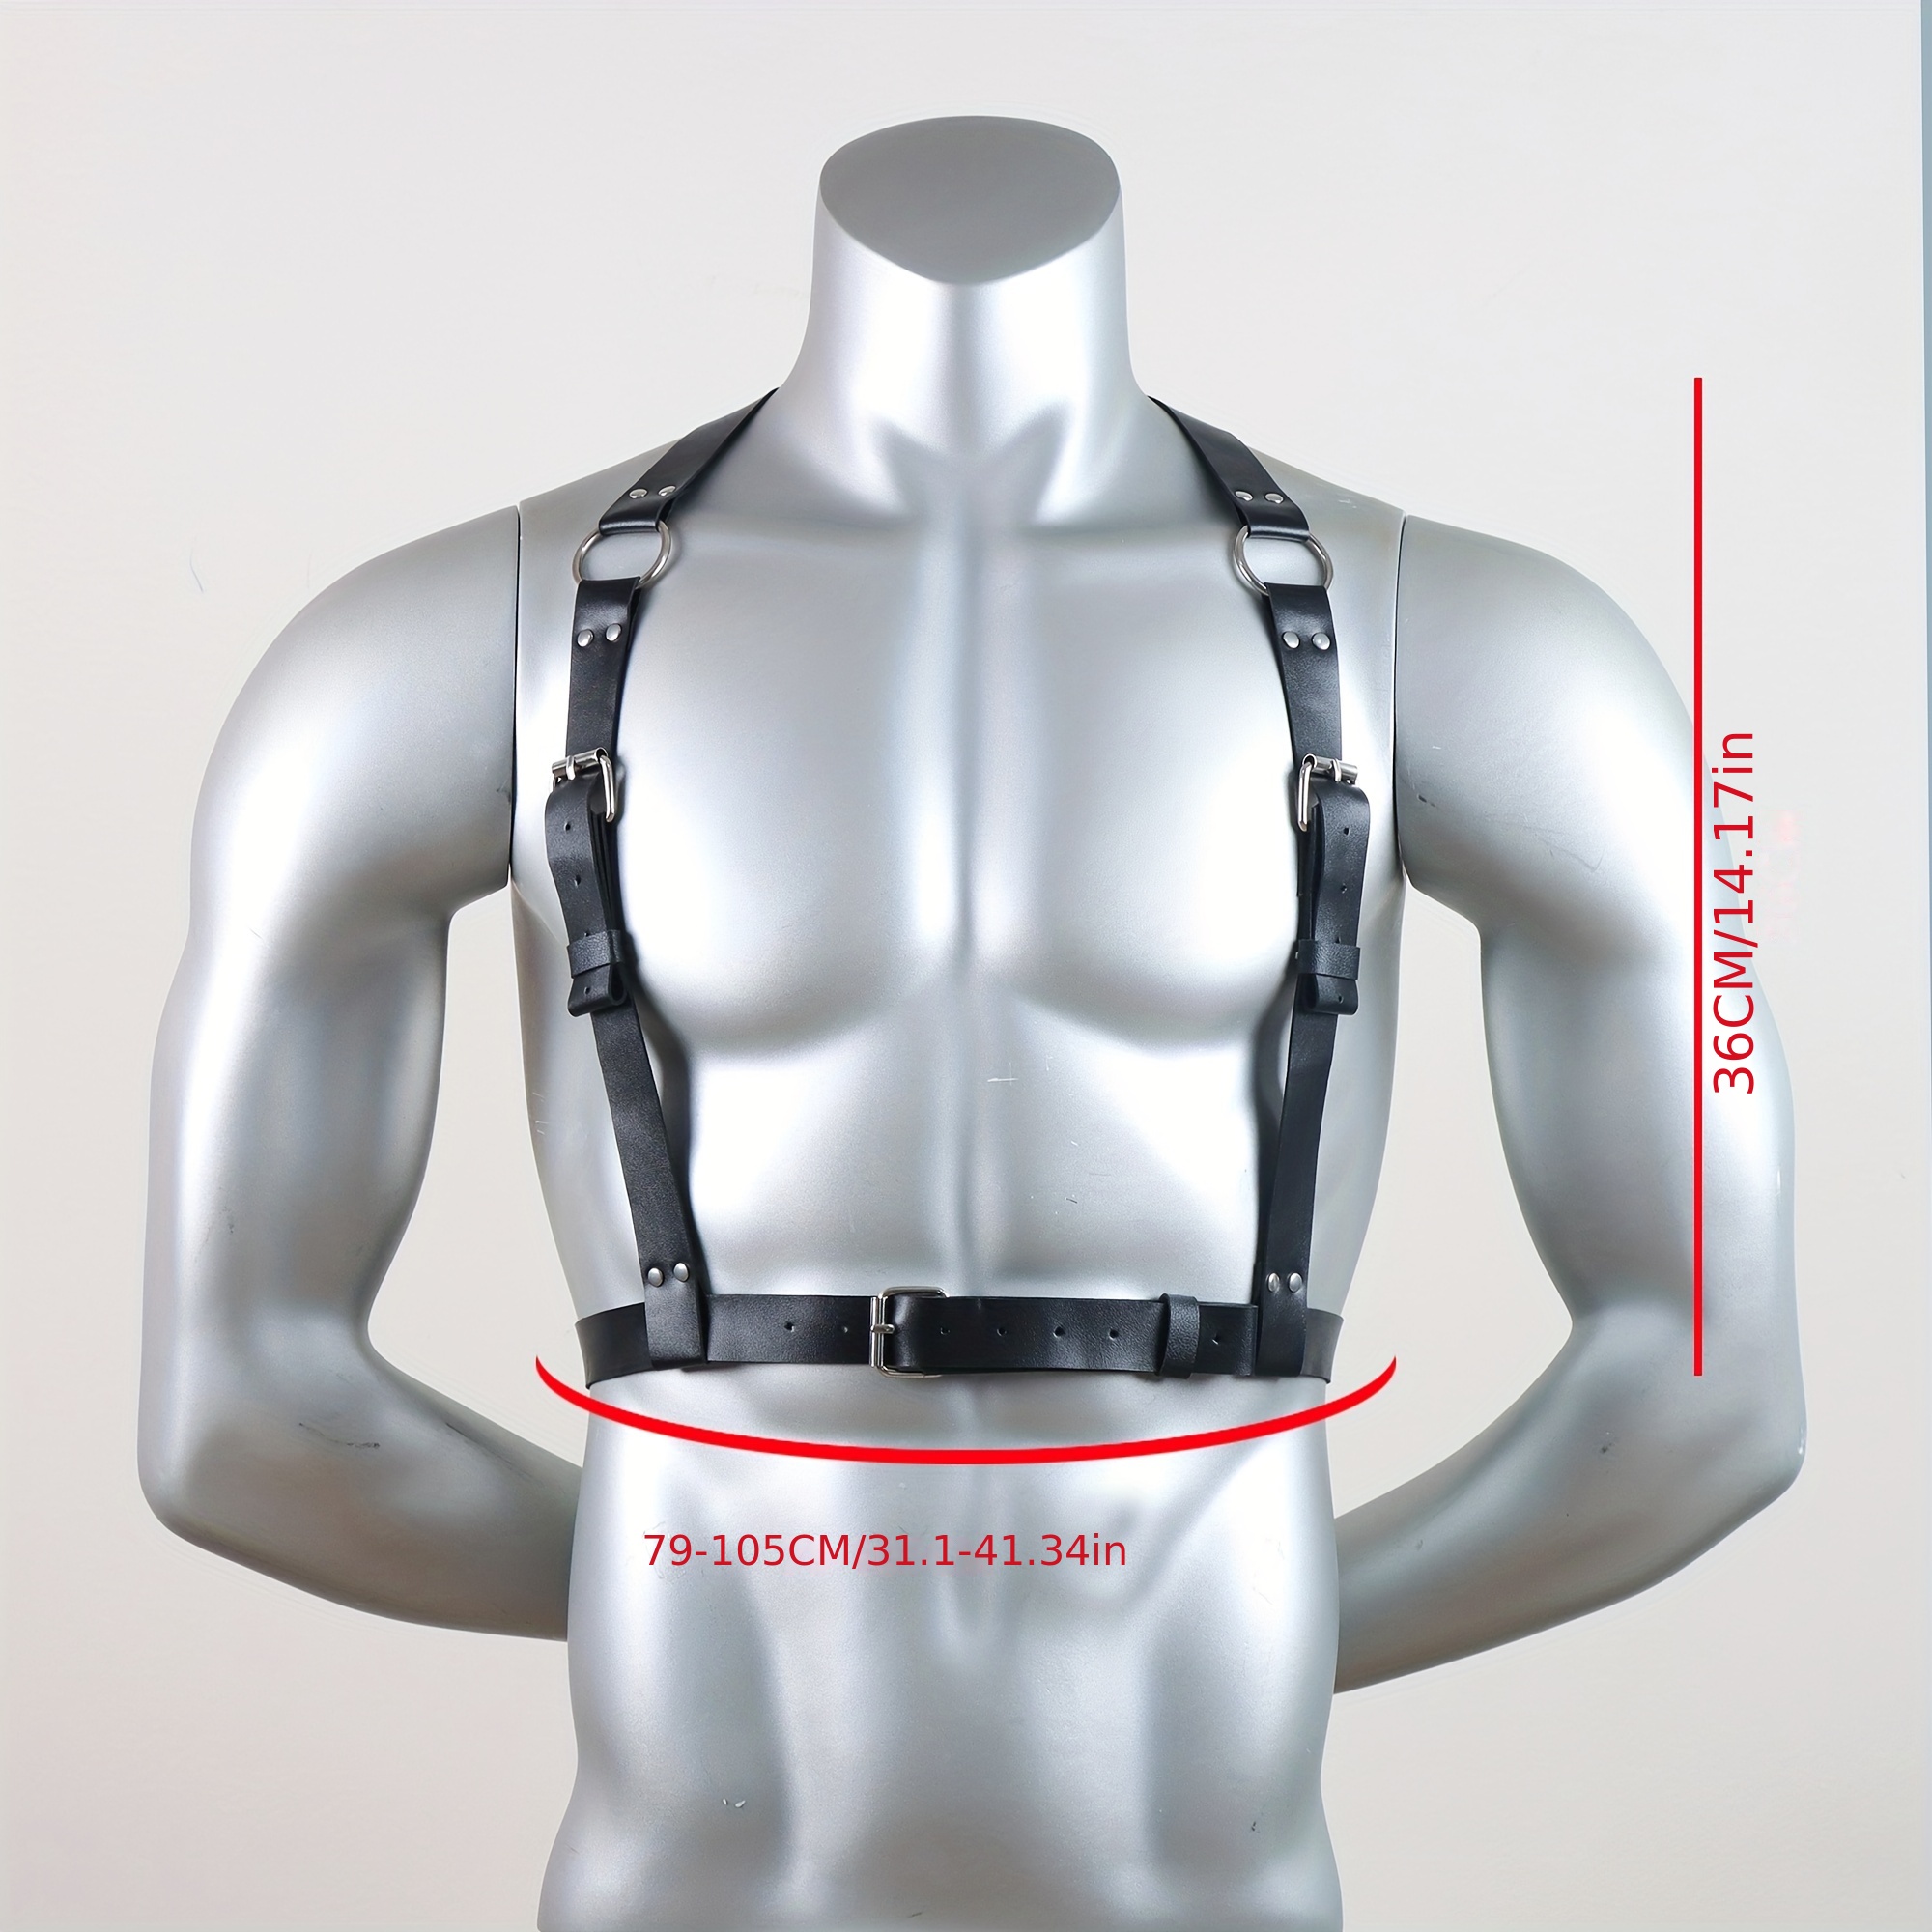 Erotic Leather Chest Harness for Muscle Men / Belts Body Harness